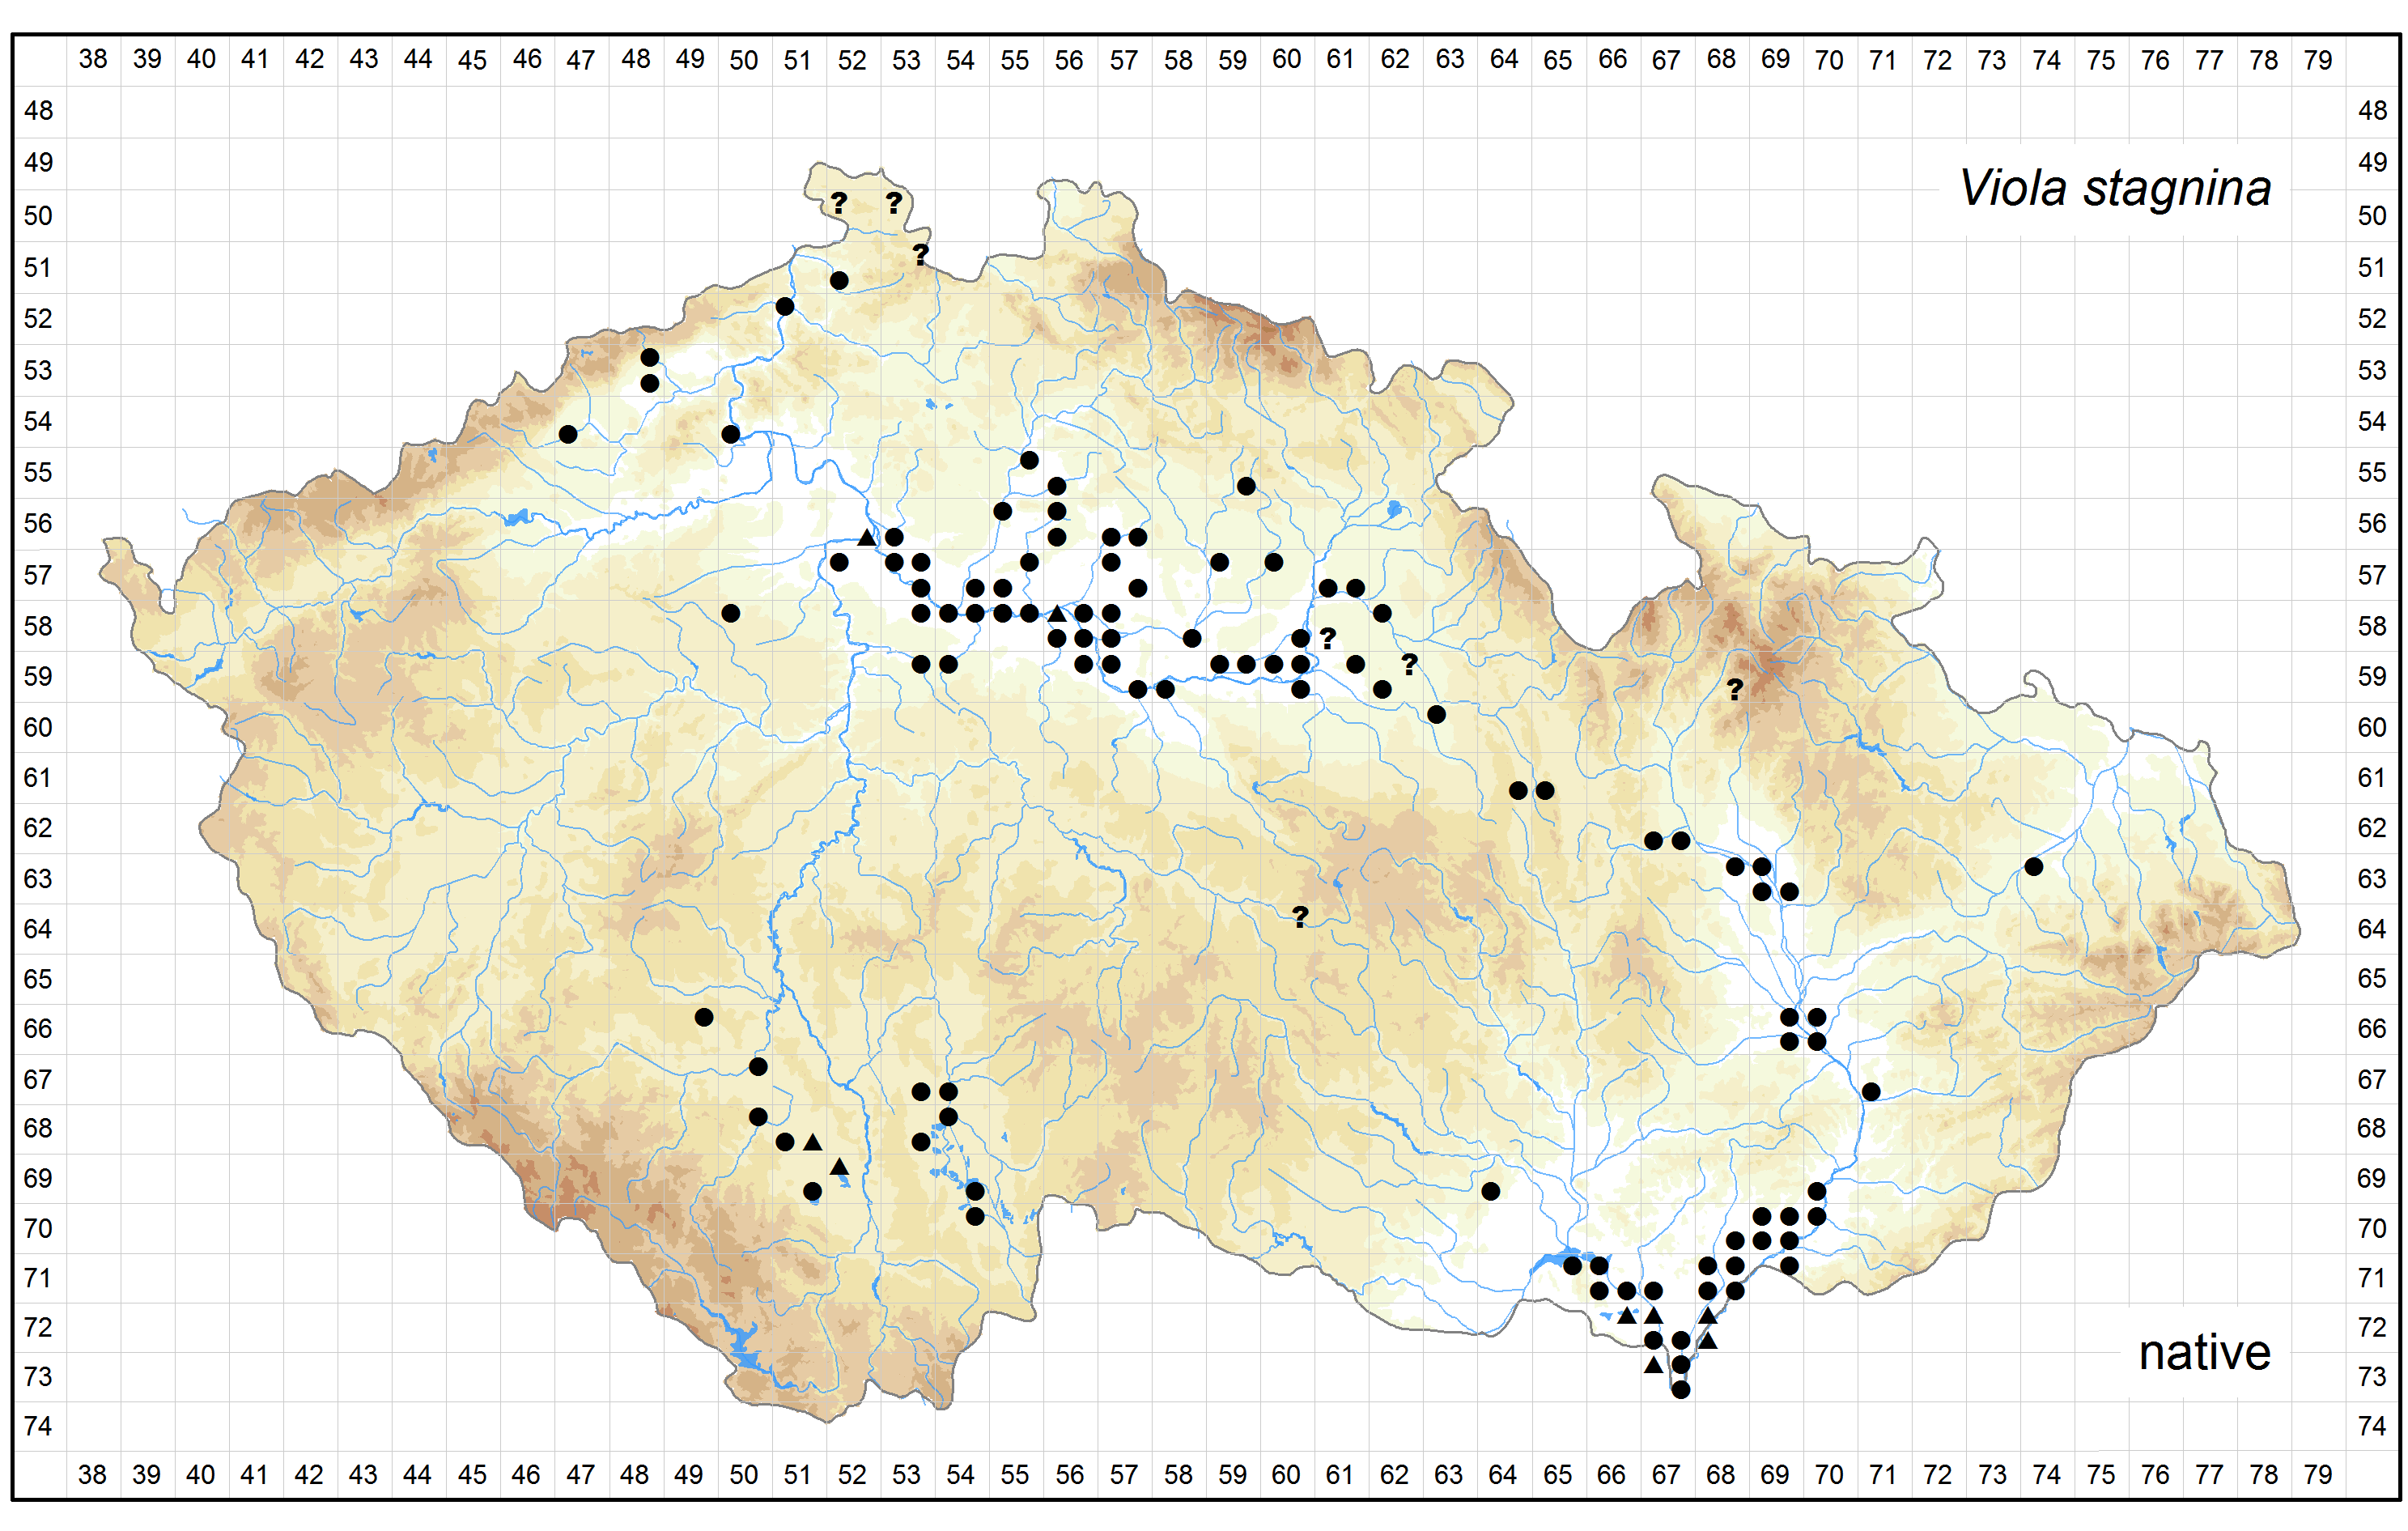 Distribution of Viola stagnina in the Czech Republic Author of the map: Jiří Danihelka Map produced on: 18-11-2015 Database records used for producing the distribution map of Viola stagnina published